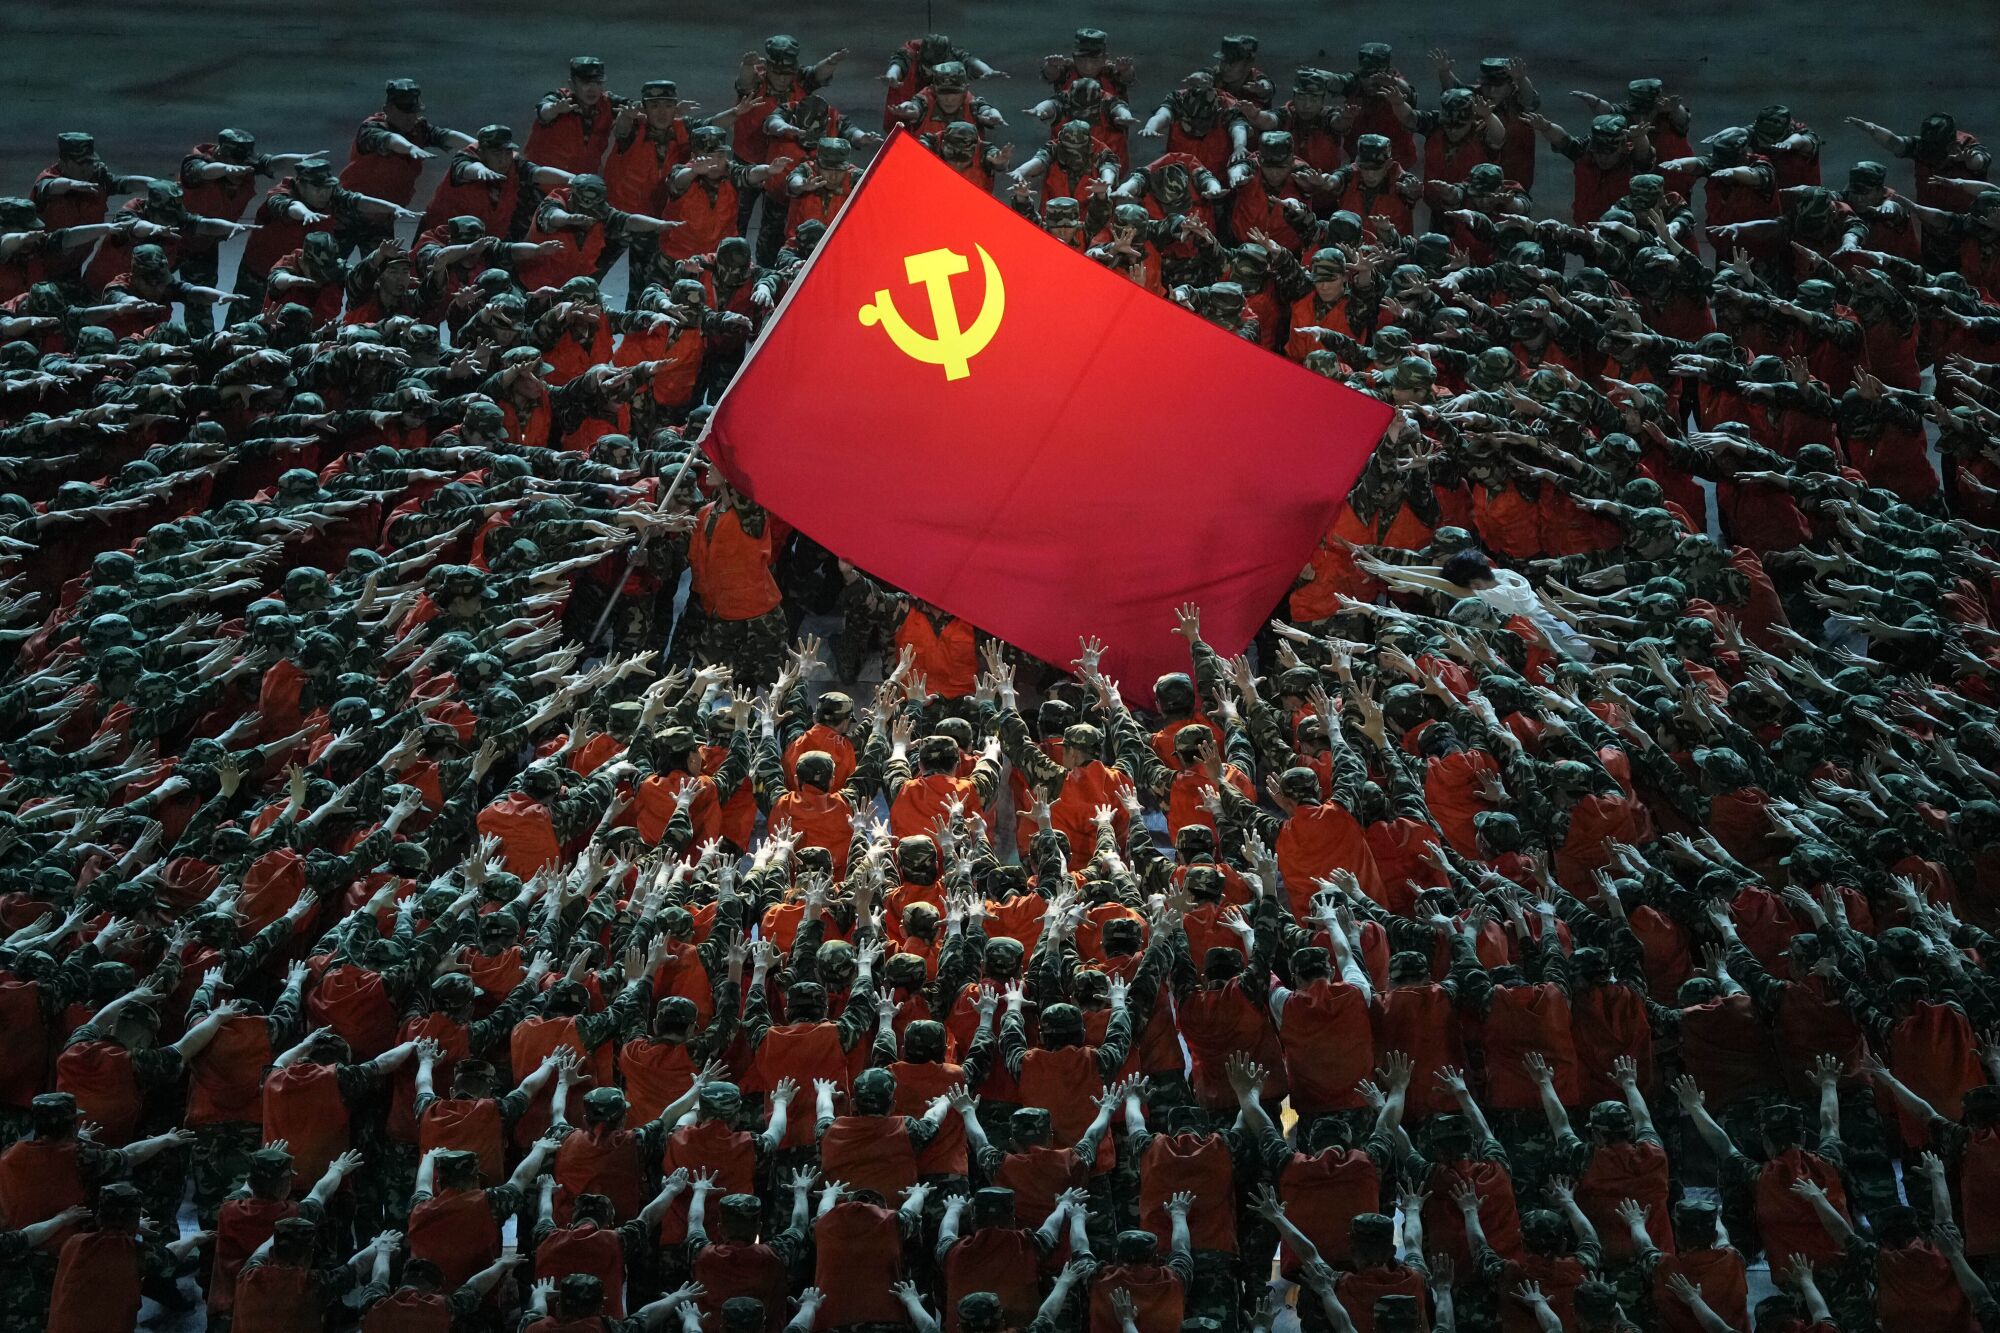 A large red flag with a hammer and sickle symbol is encircled by rows of people wearing red, with arms extended